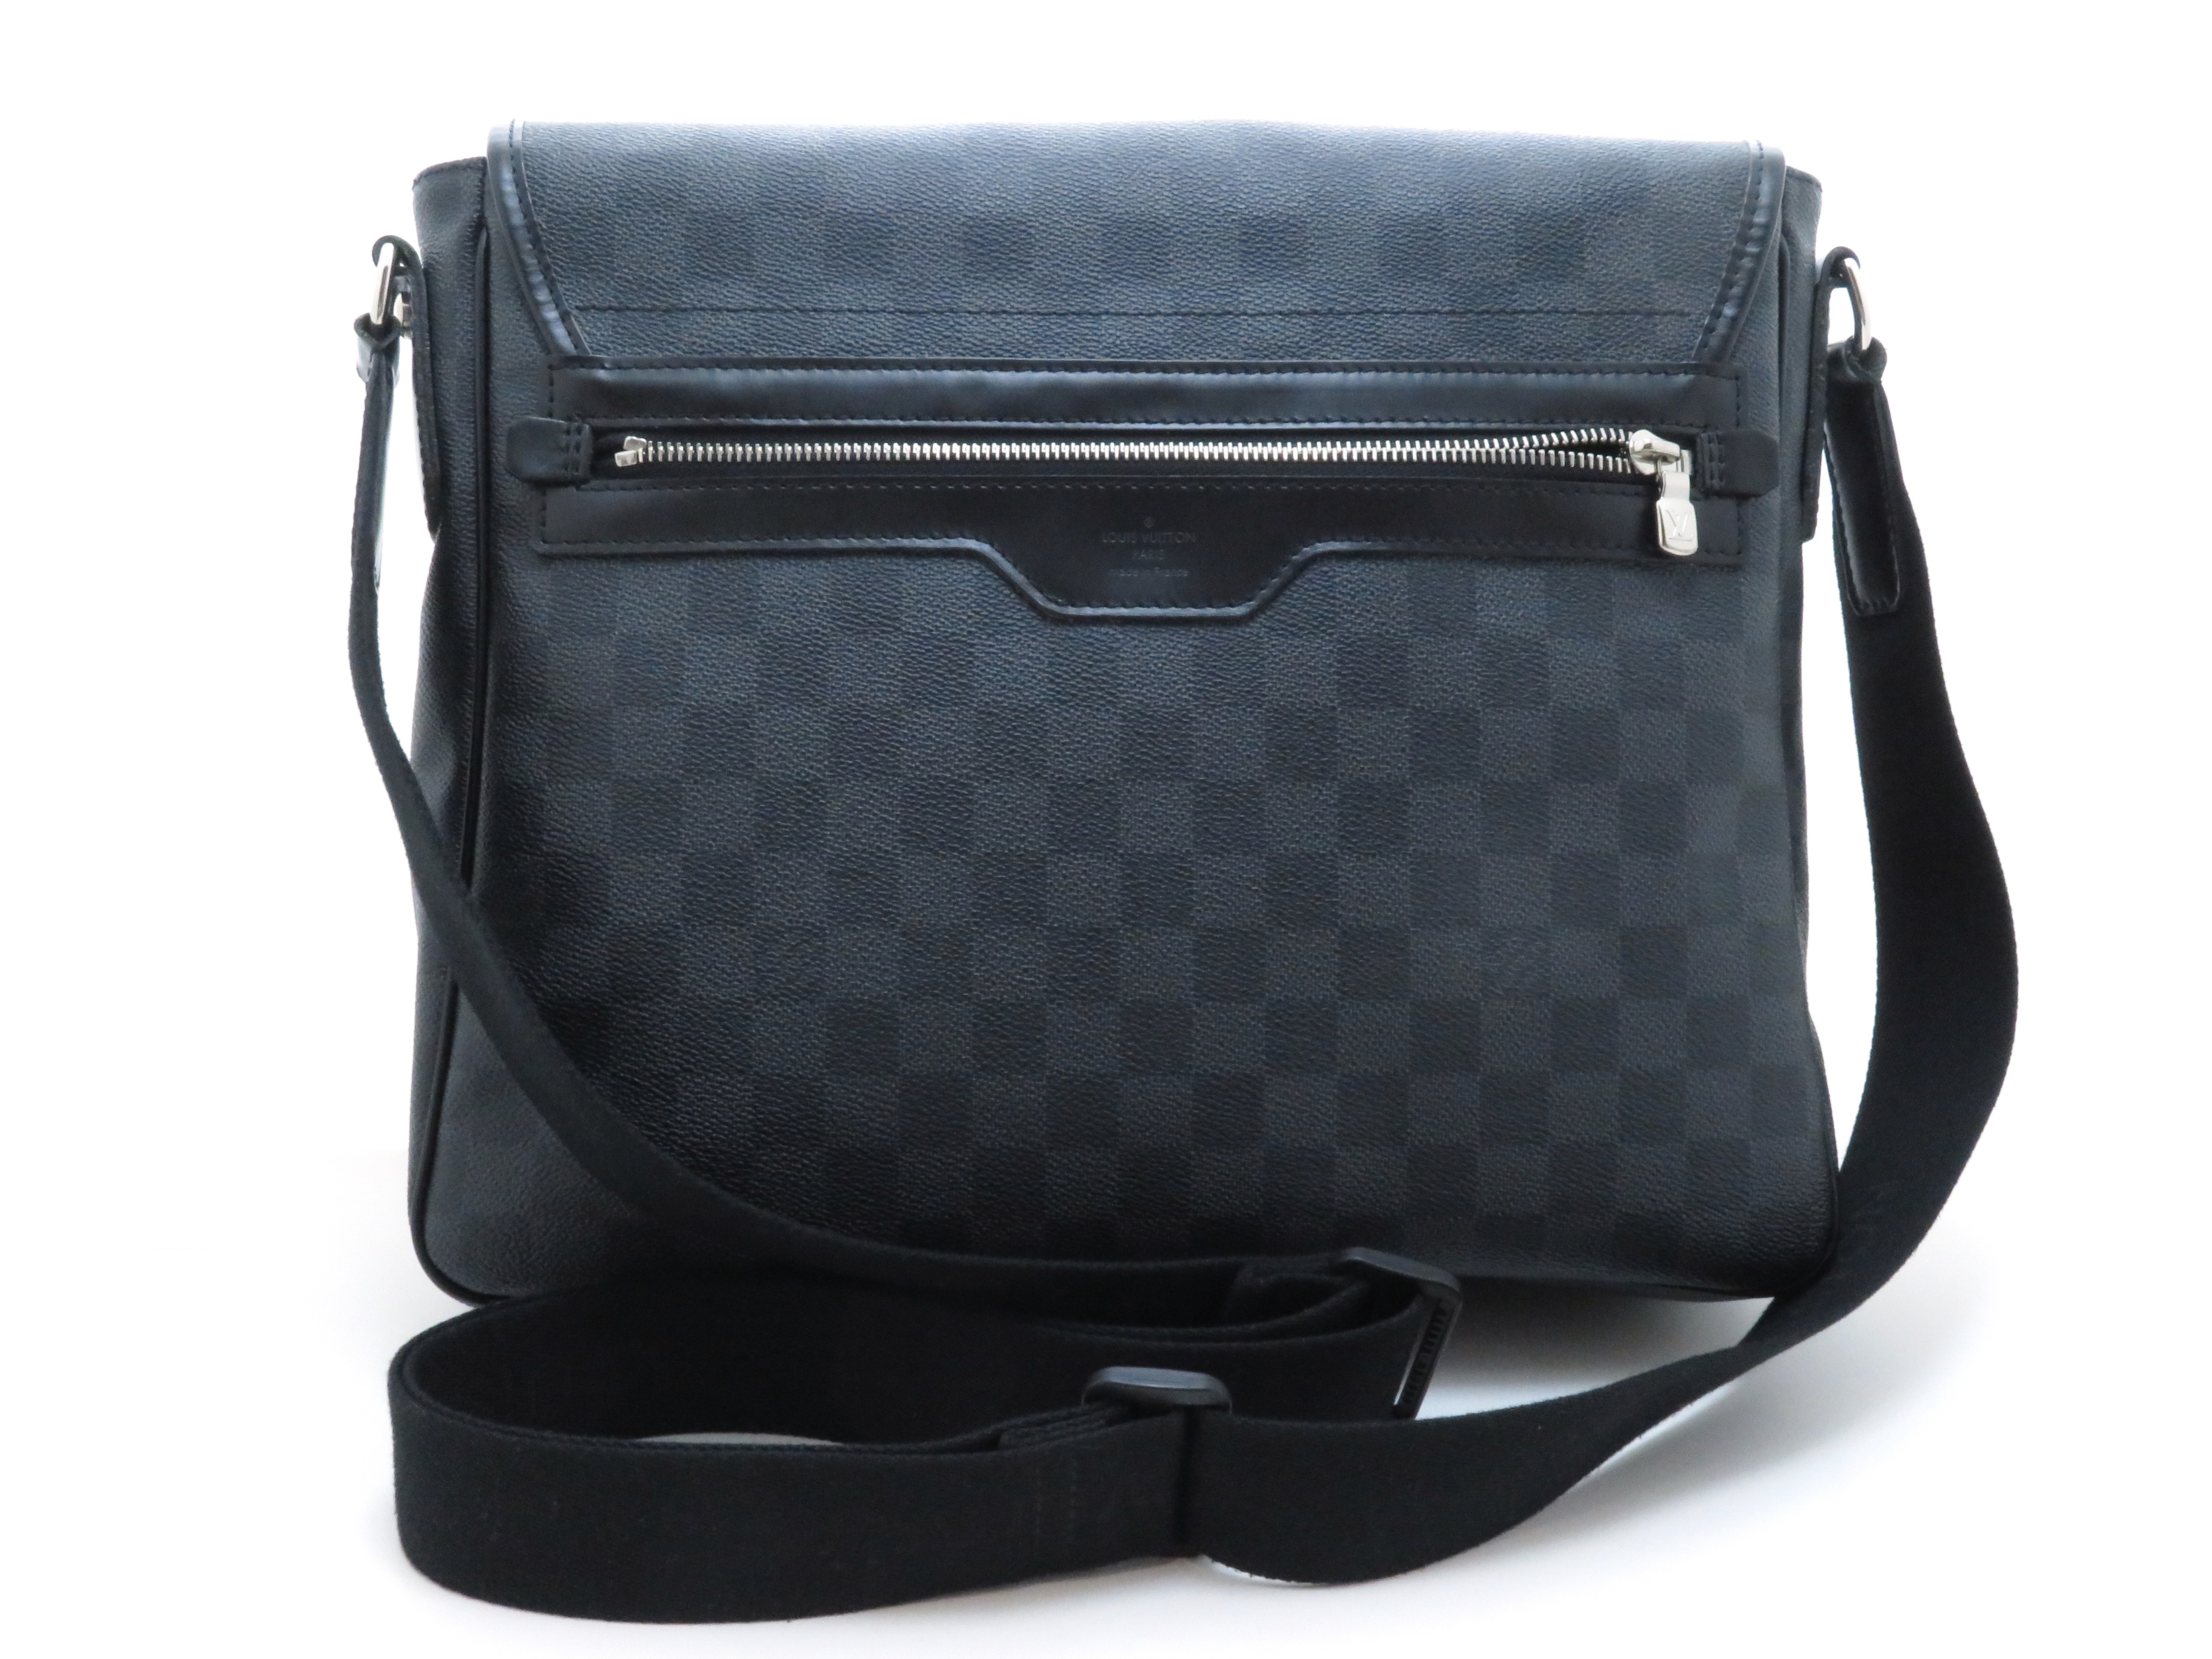 LOUIS VUITTON ルイ・ヴィトン レンツォ ダミエ・グラフィット N51213